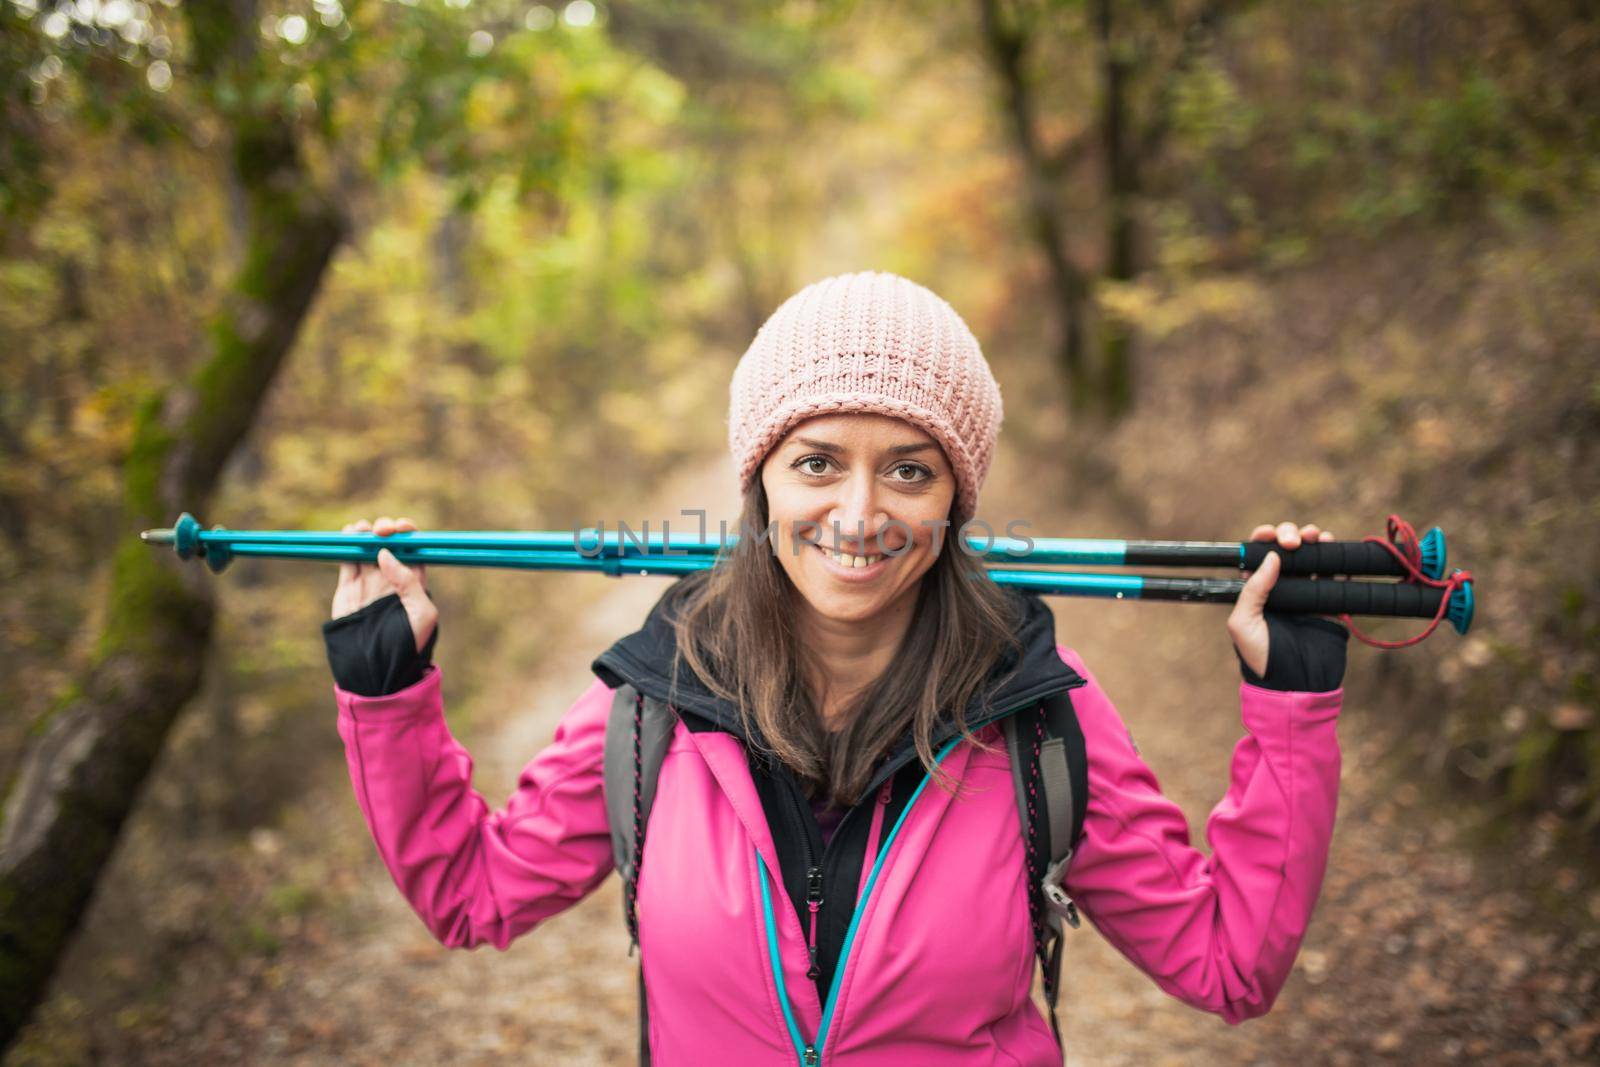 Hiker girl in pink on a trail in the forest. Looking at camera with poles in hands. Nature in fall season.